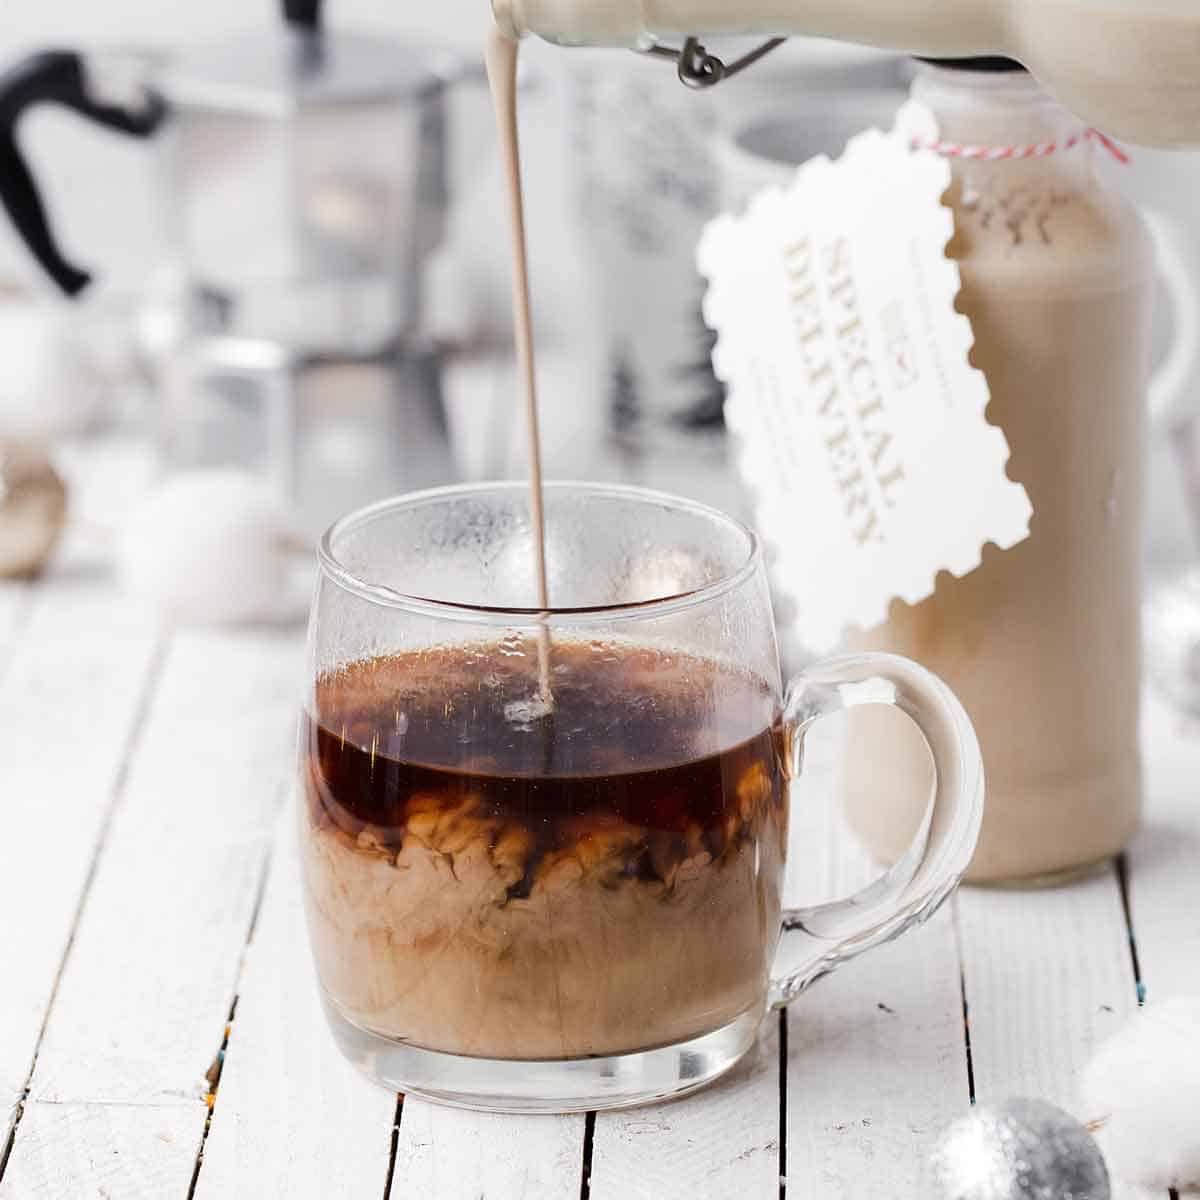 Homemade Baileys Irish Cream being poured into a glass coffee cup so that the swirls of dark coffee and light cream are visible.